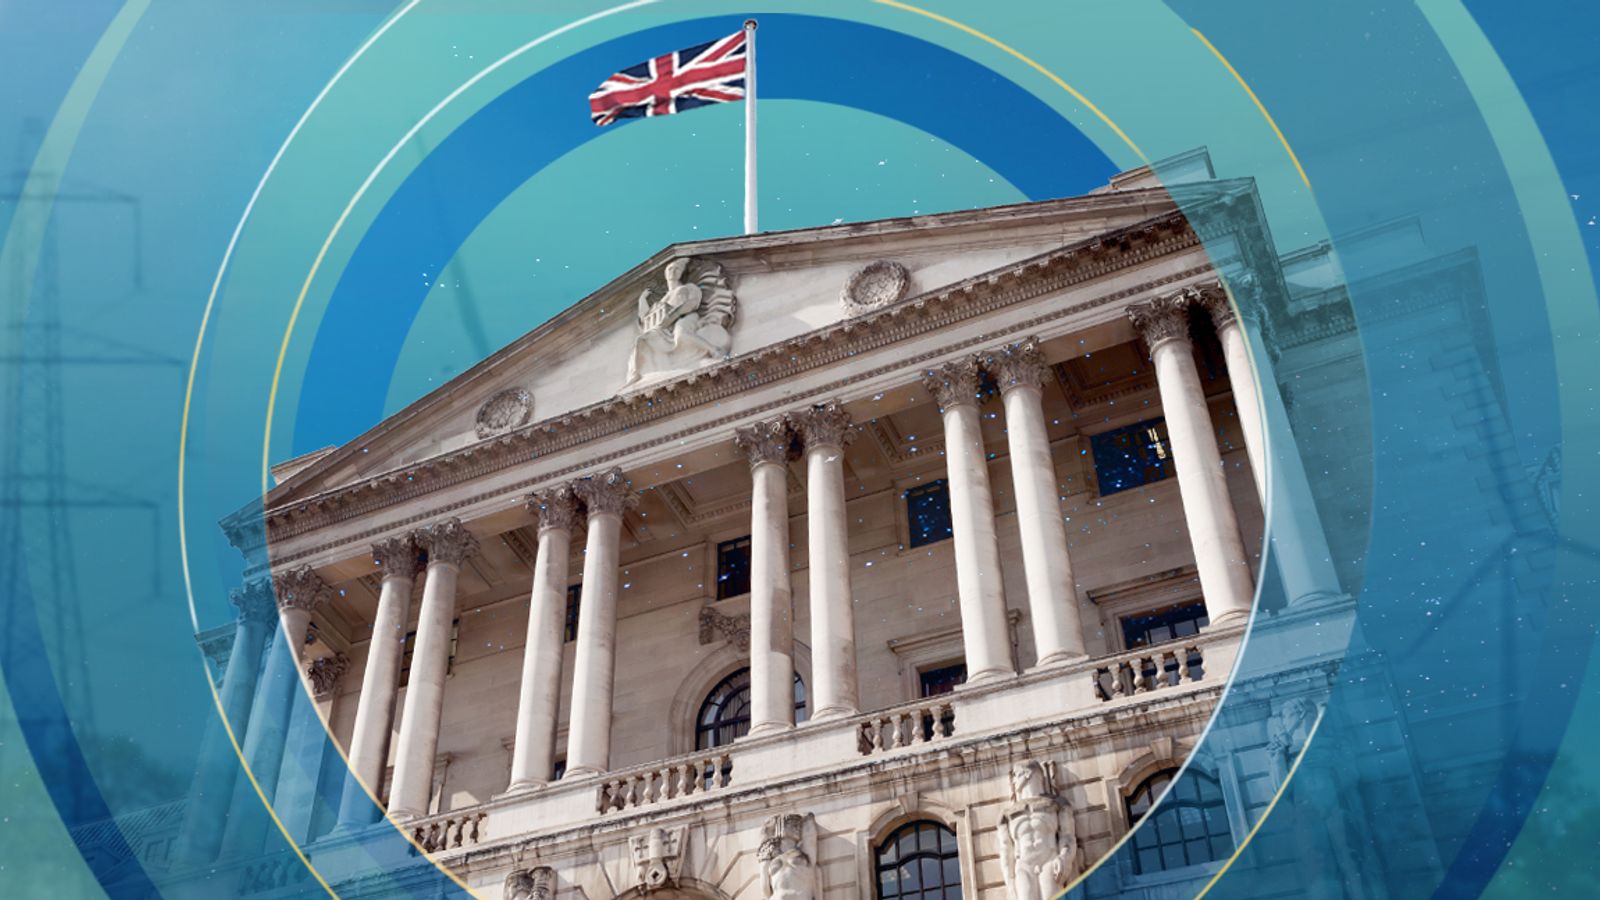 Bank of England tells banks: 'Take climate action now or face profits hit'